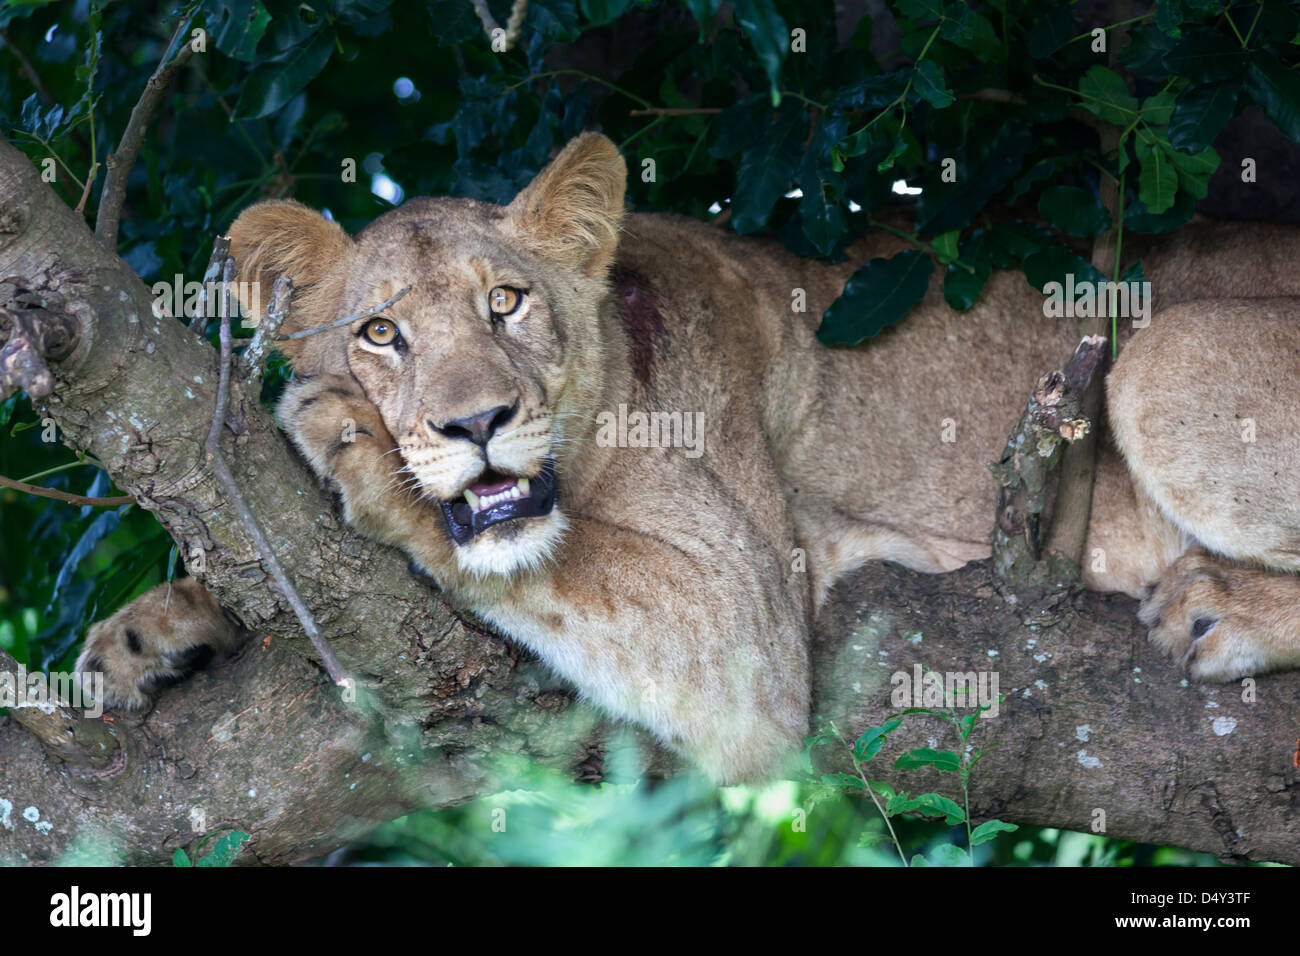 Lion (Panthera leo) in tree, &Beyond Phinda private game reserve, South Africa, February 2013 Stock Photo